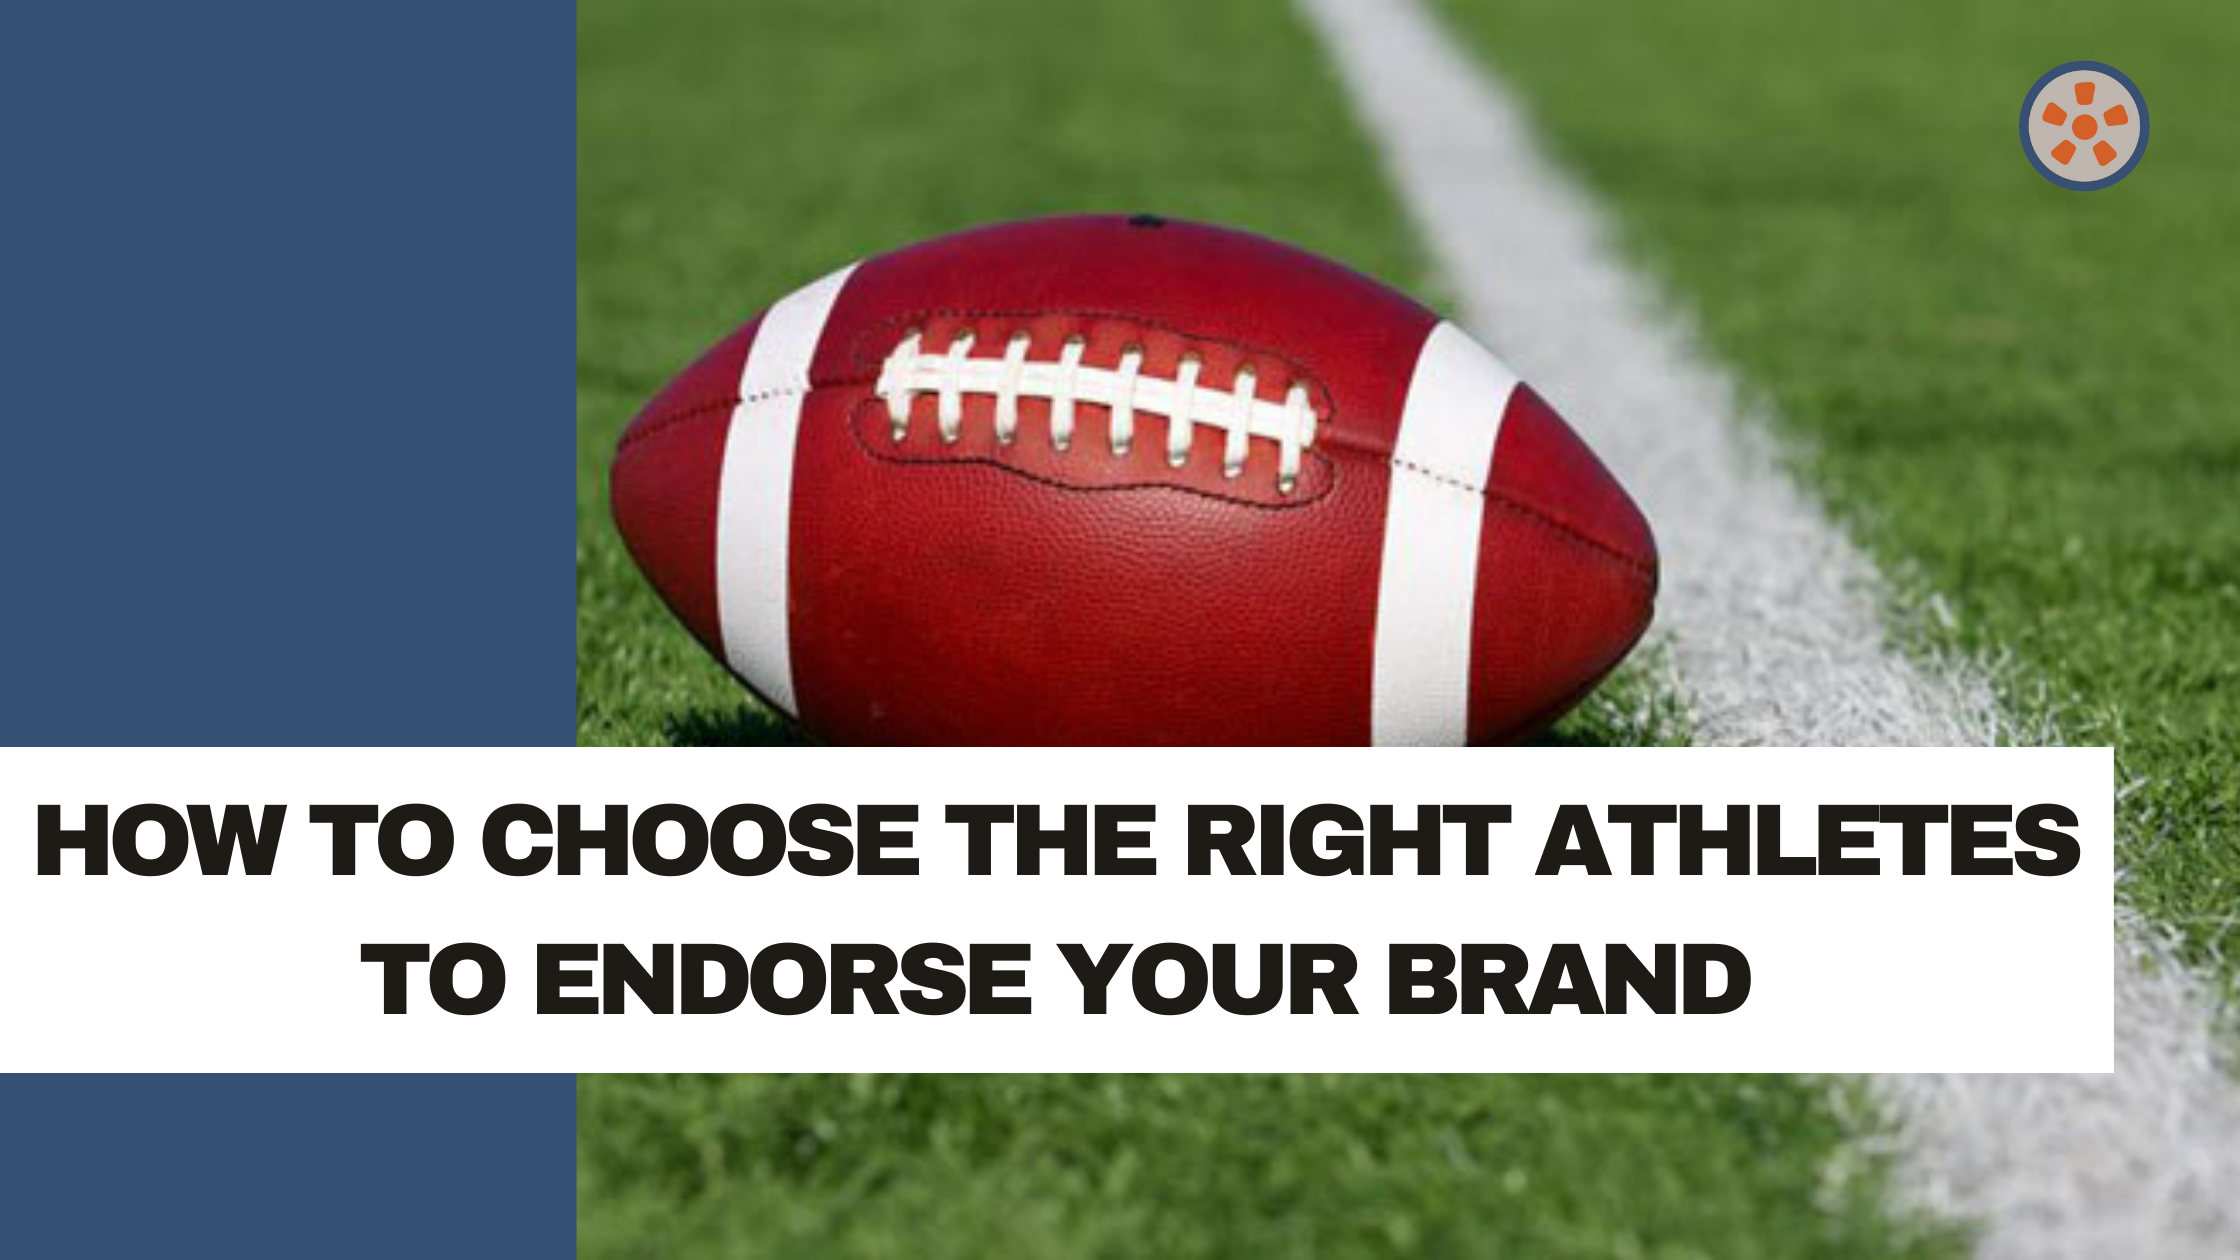 How to Choose the Right Athletes to Endorse Your Brand